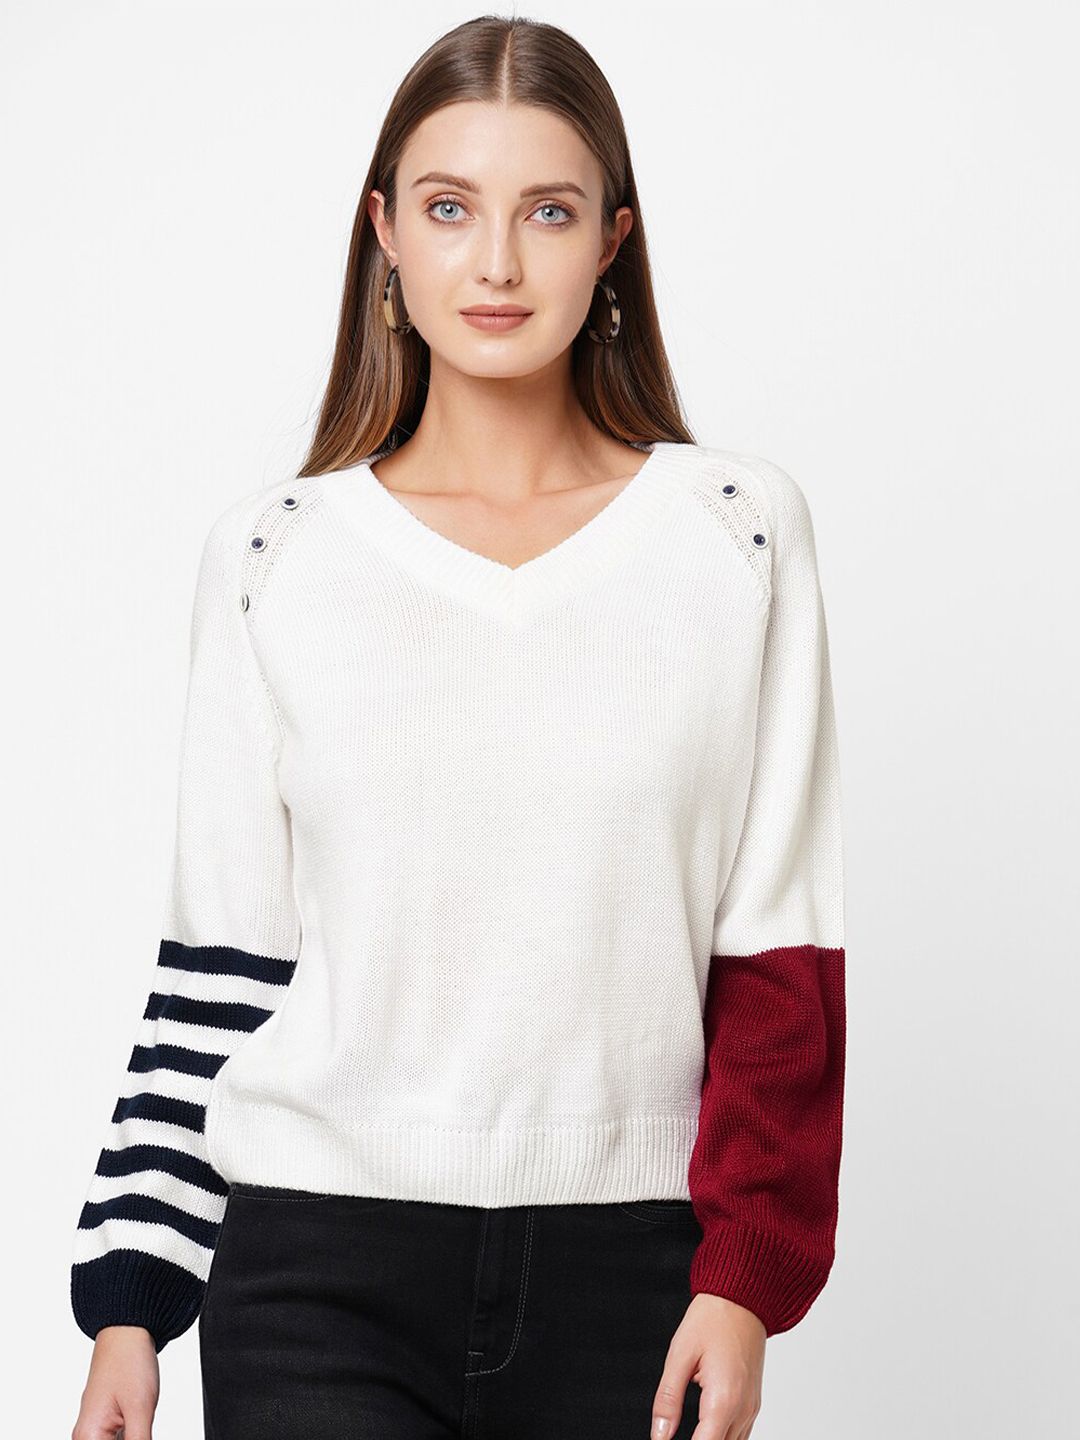 Pepe Jeans Women White & Black Colourblocked Acrylic Pullover Sweater Price in India